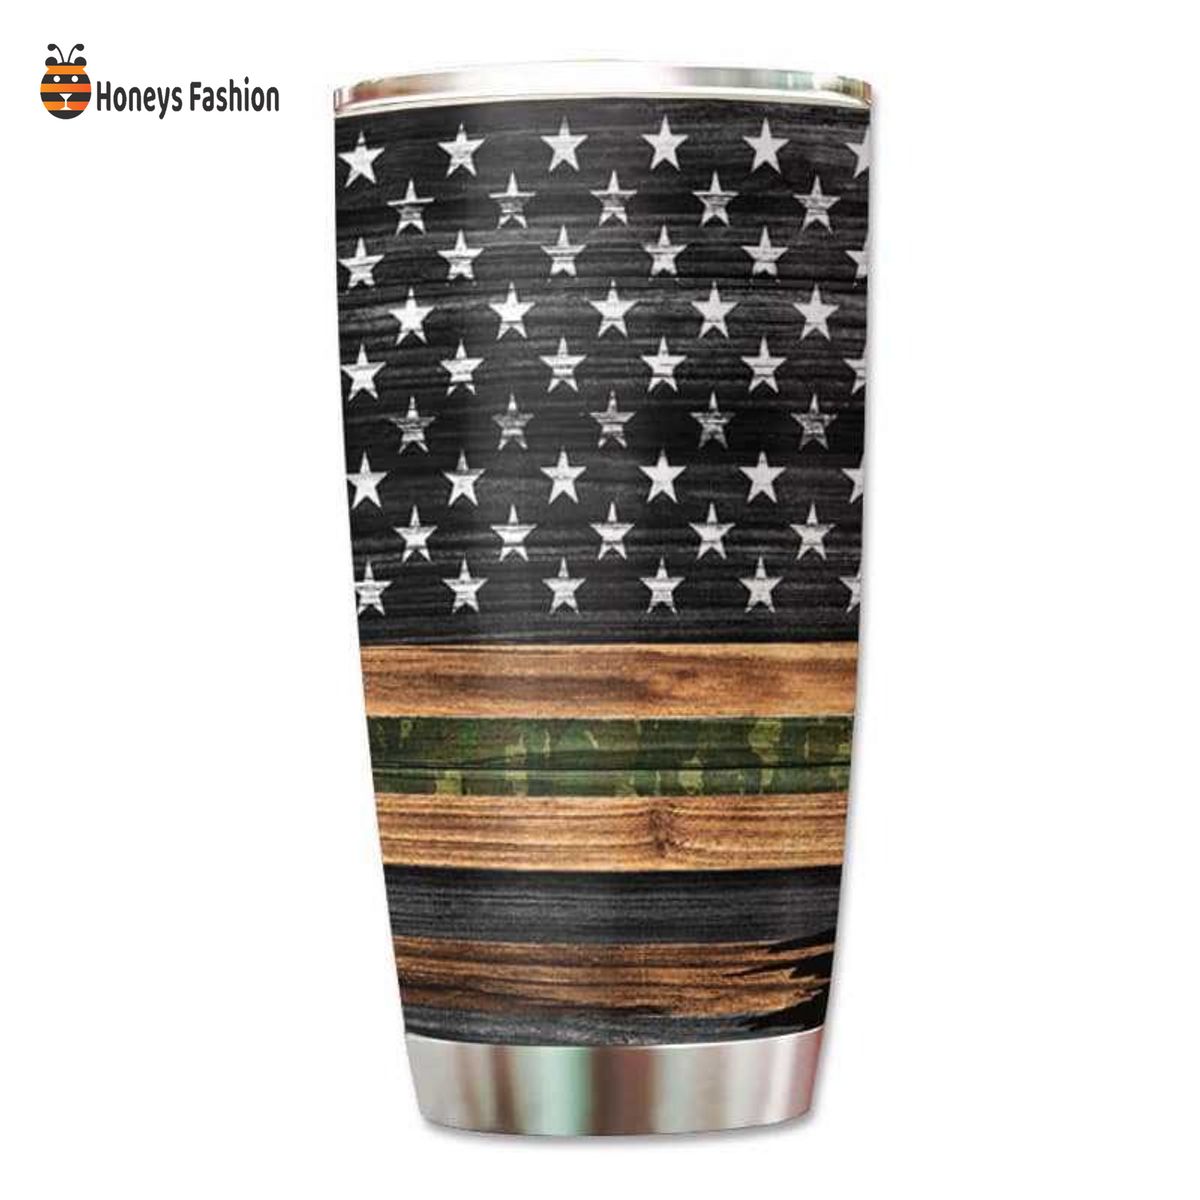 Vasquez Half Camouflage Flag Army Soldier Personalized Tumbler